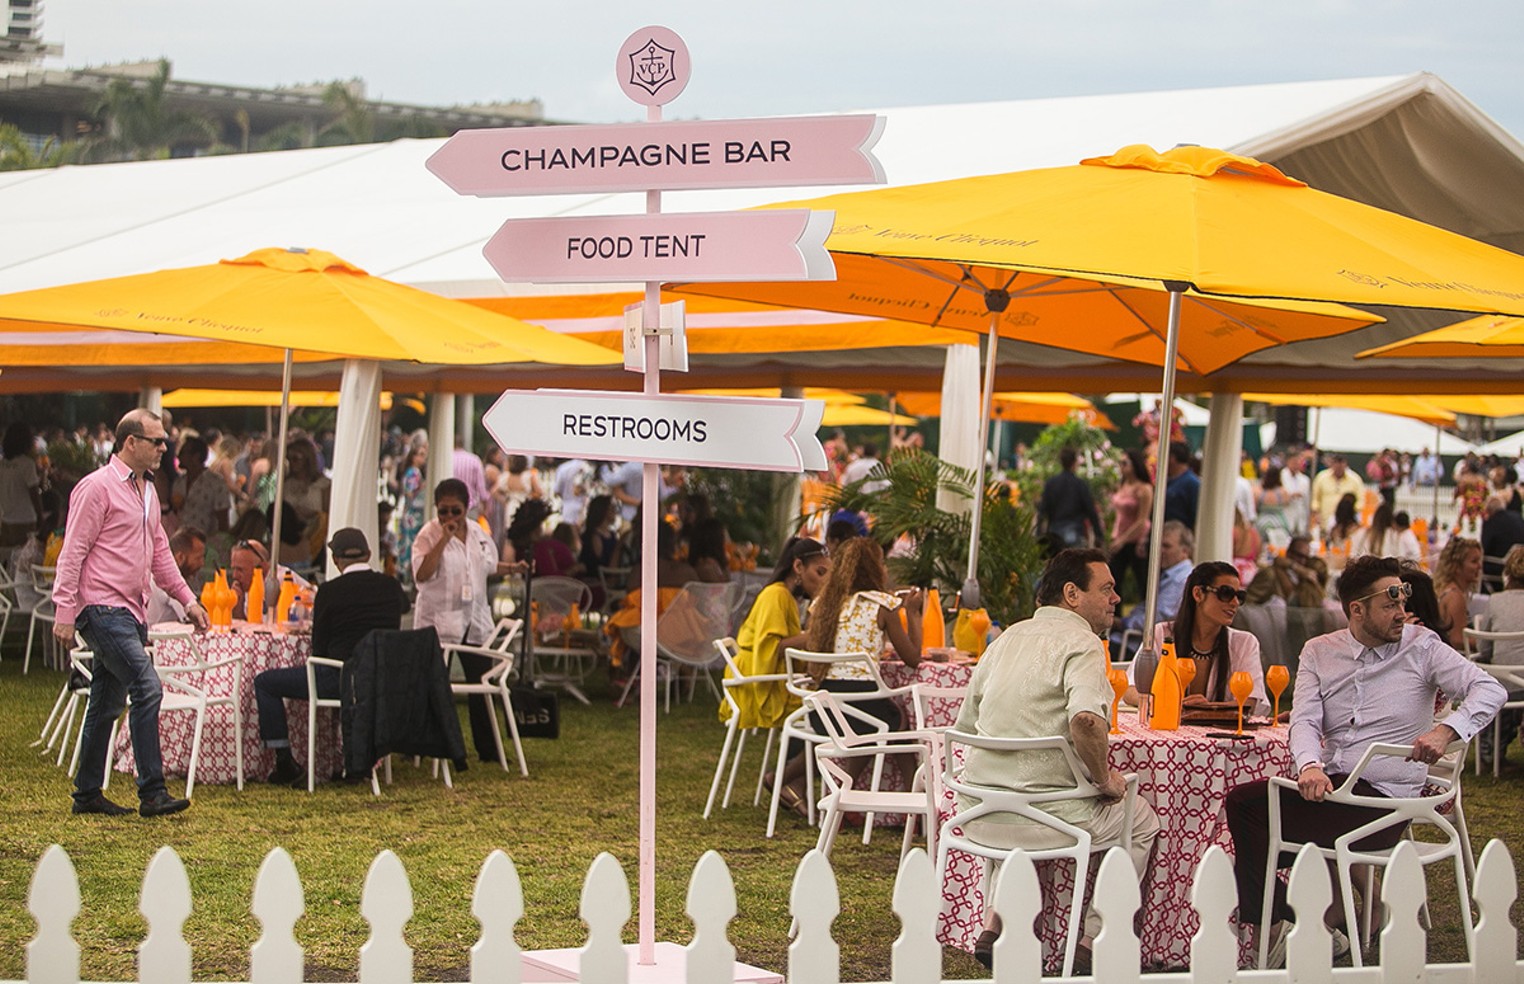 Veuve Clicquot Carnaval Returns To Miami For A Week-Long Series Of Events